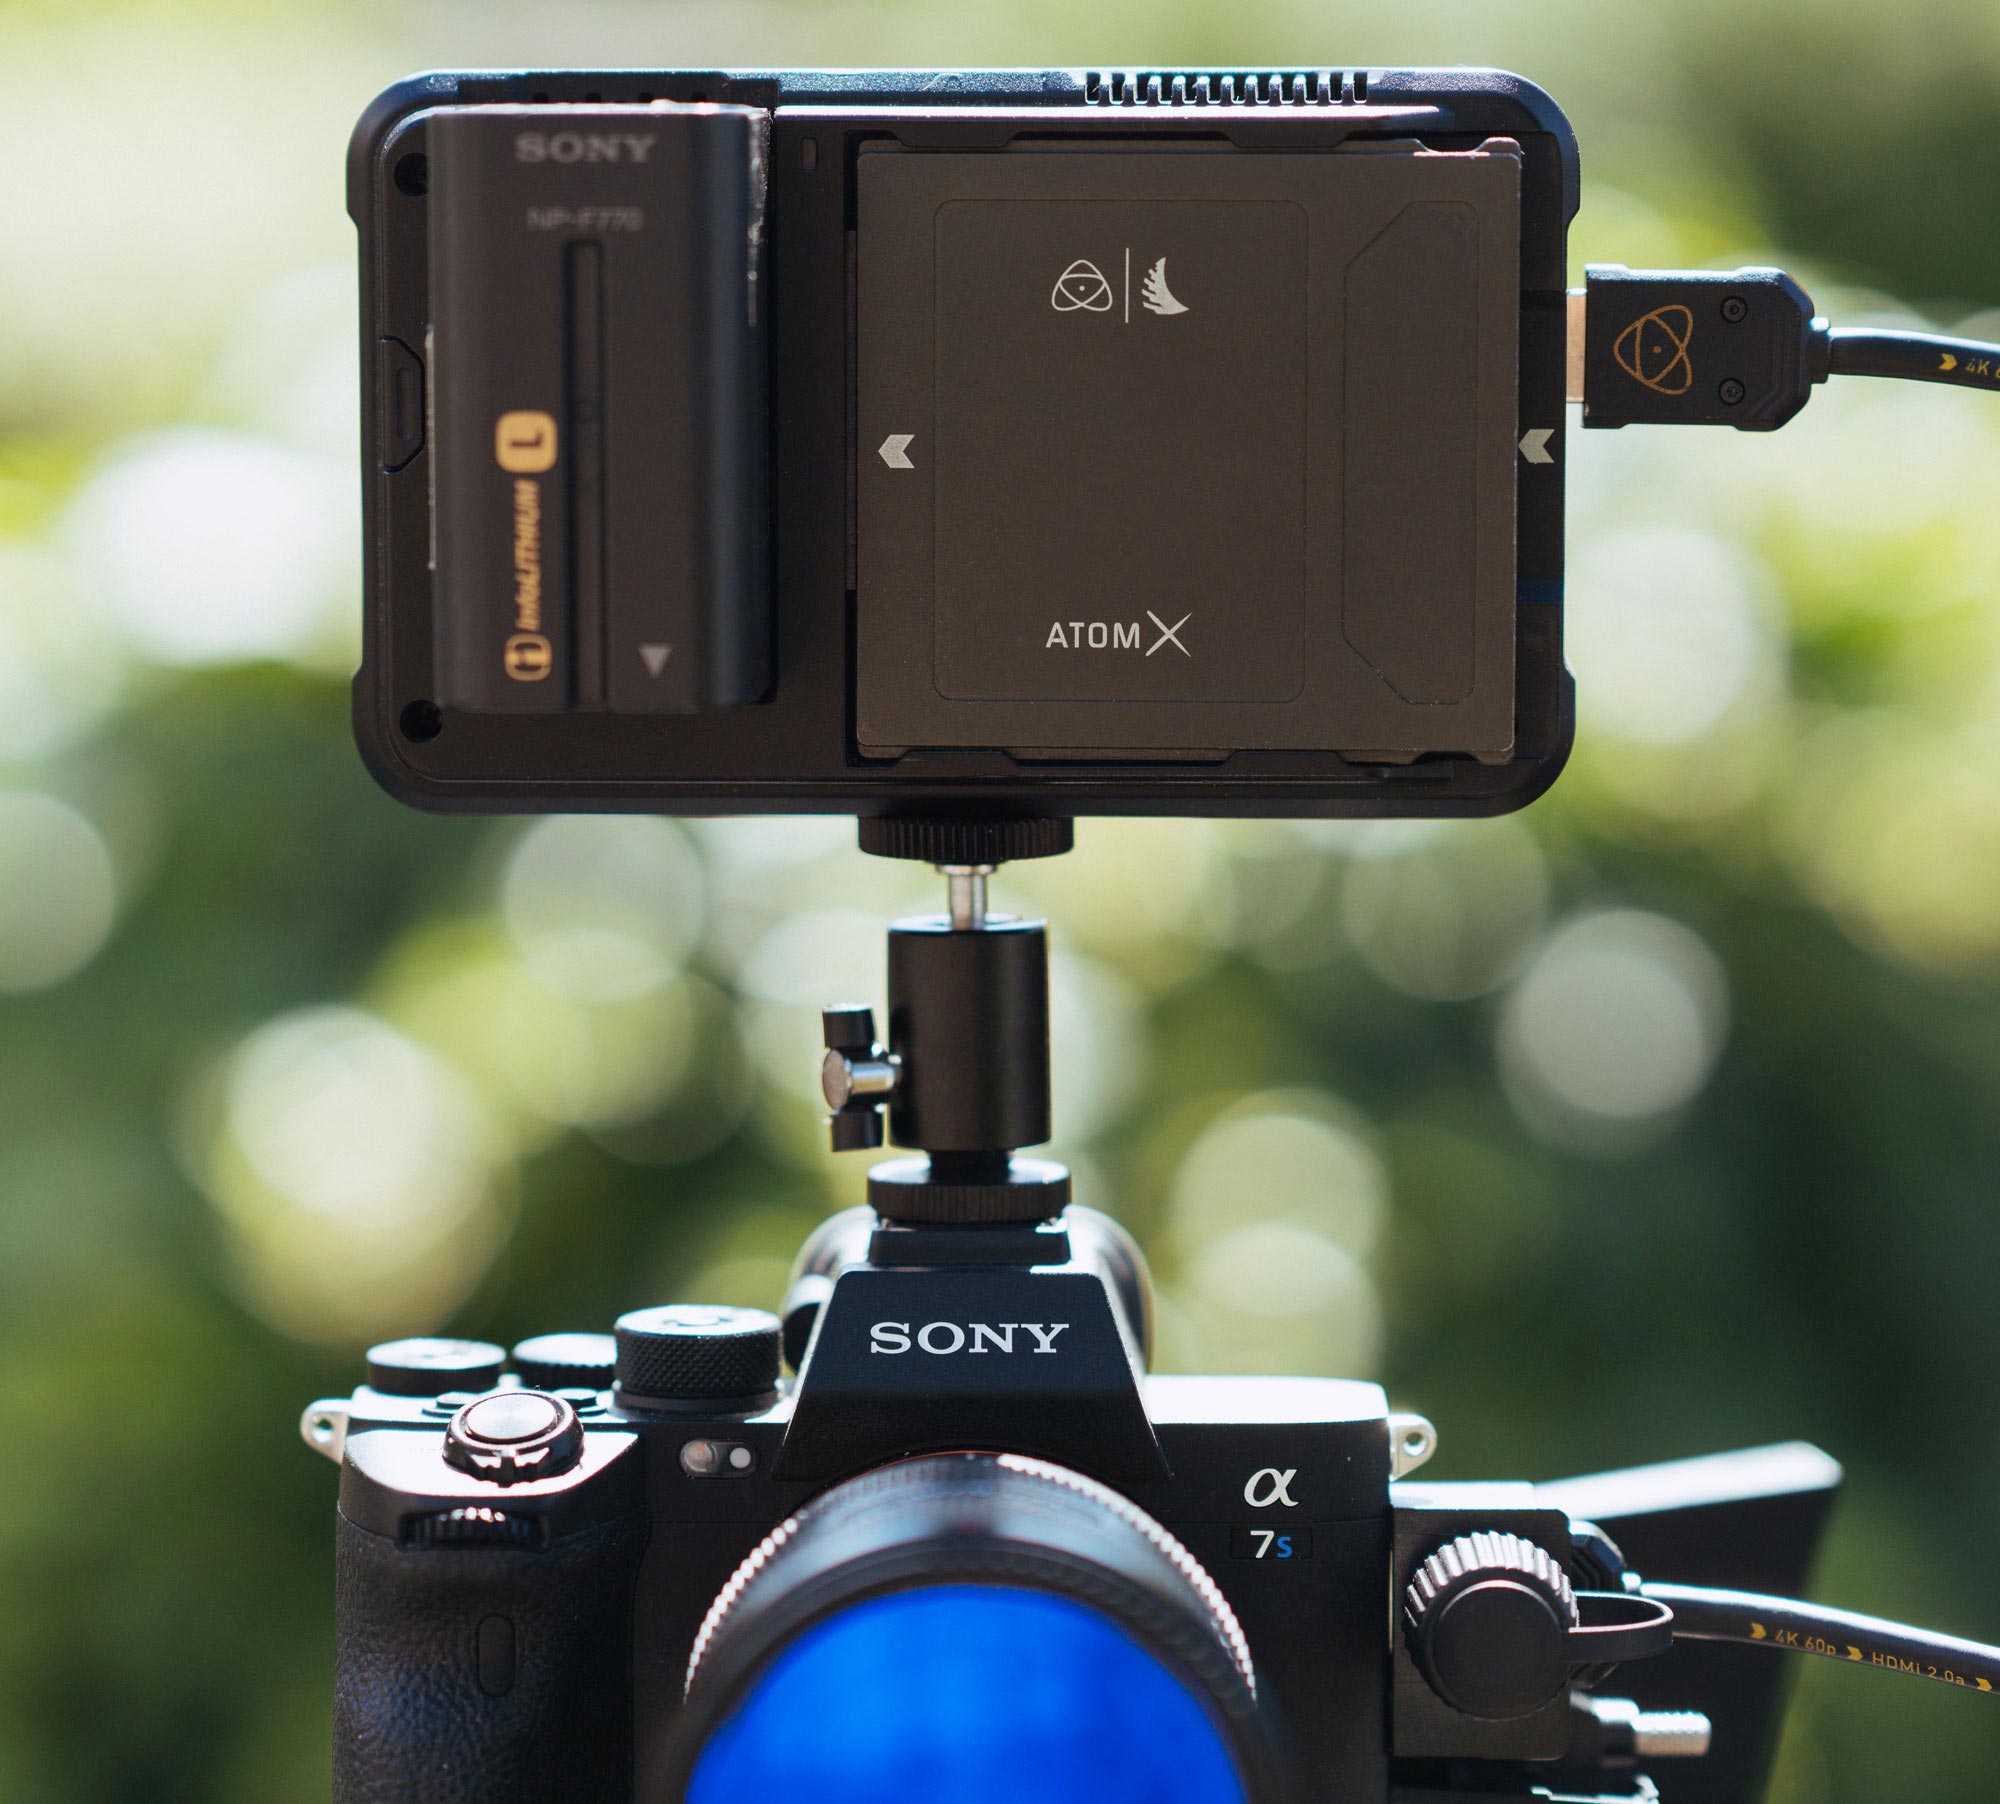 Atomos records 4Kp60 ProRes RAW with Sony Alpha 7S III